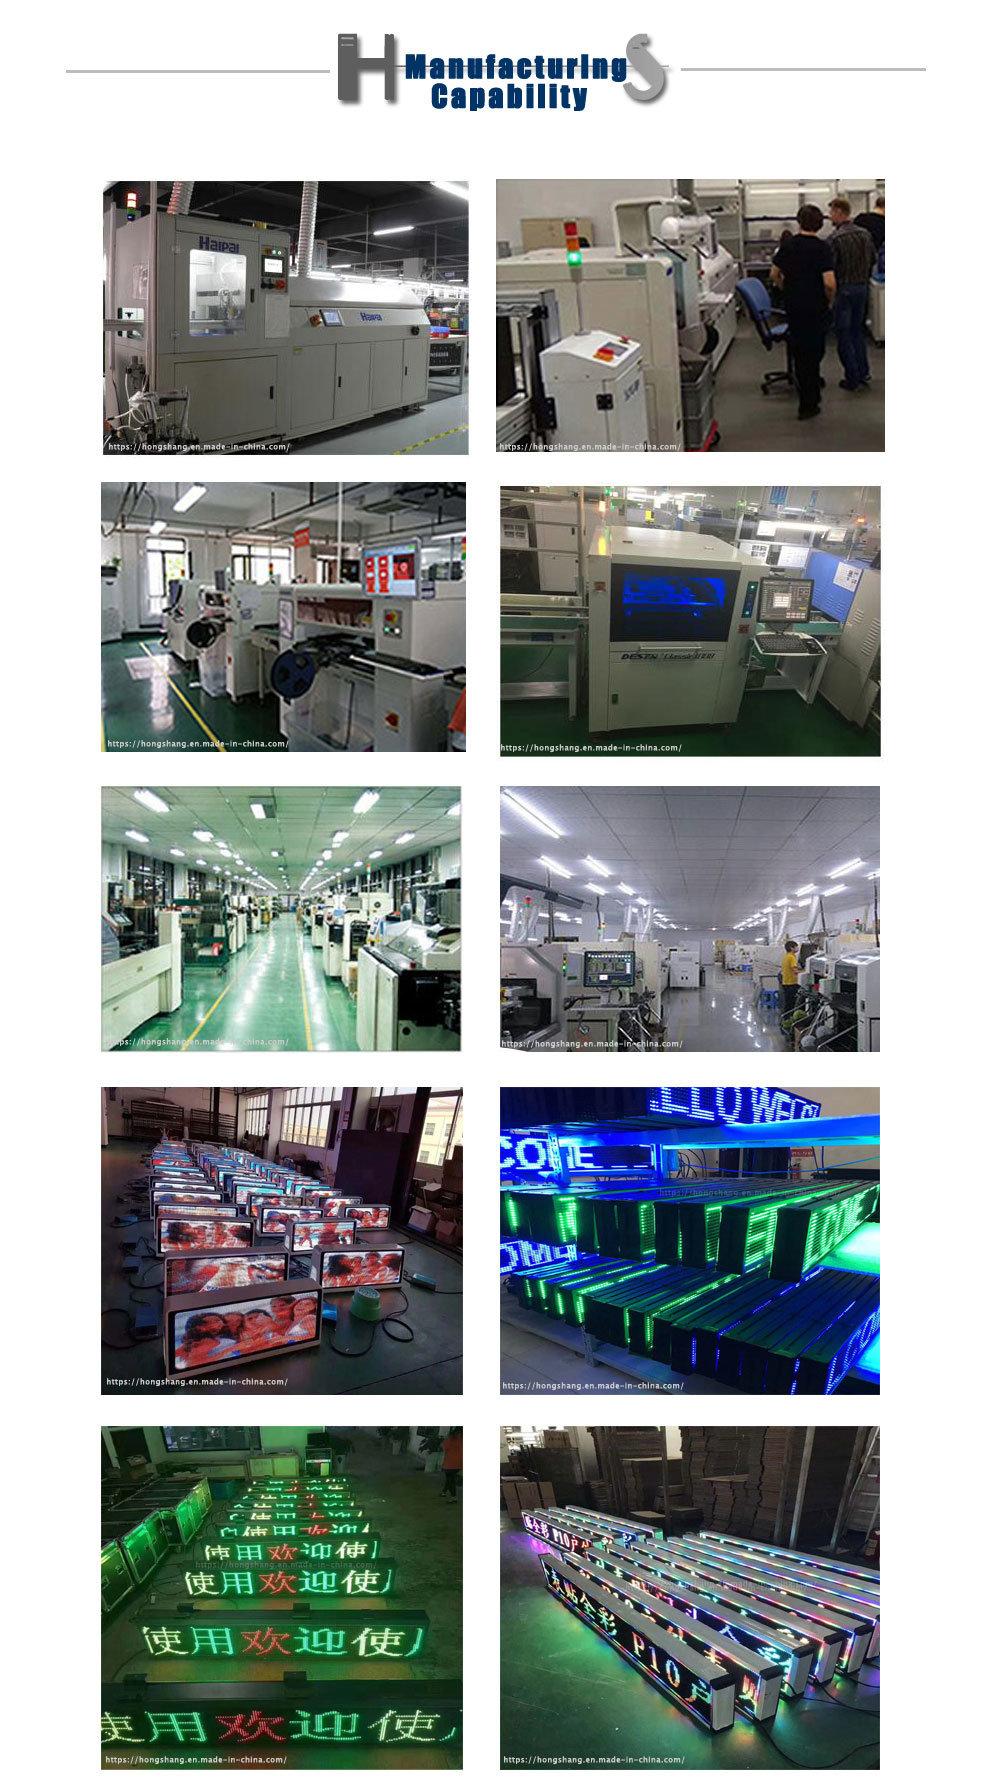 Small Size Outdoor Wall Advertising Screen Programming LED Display